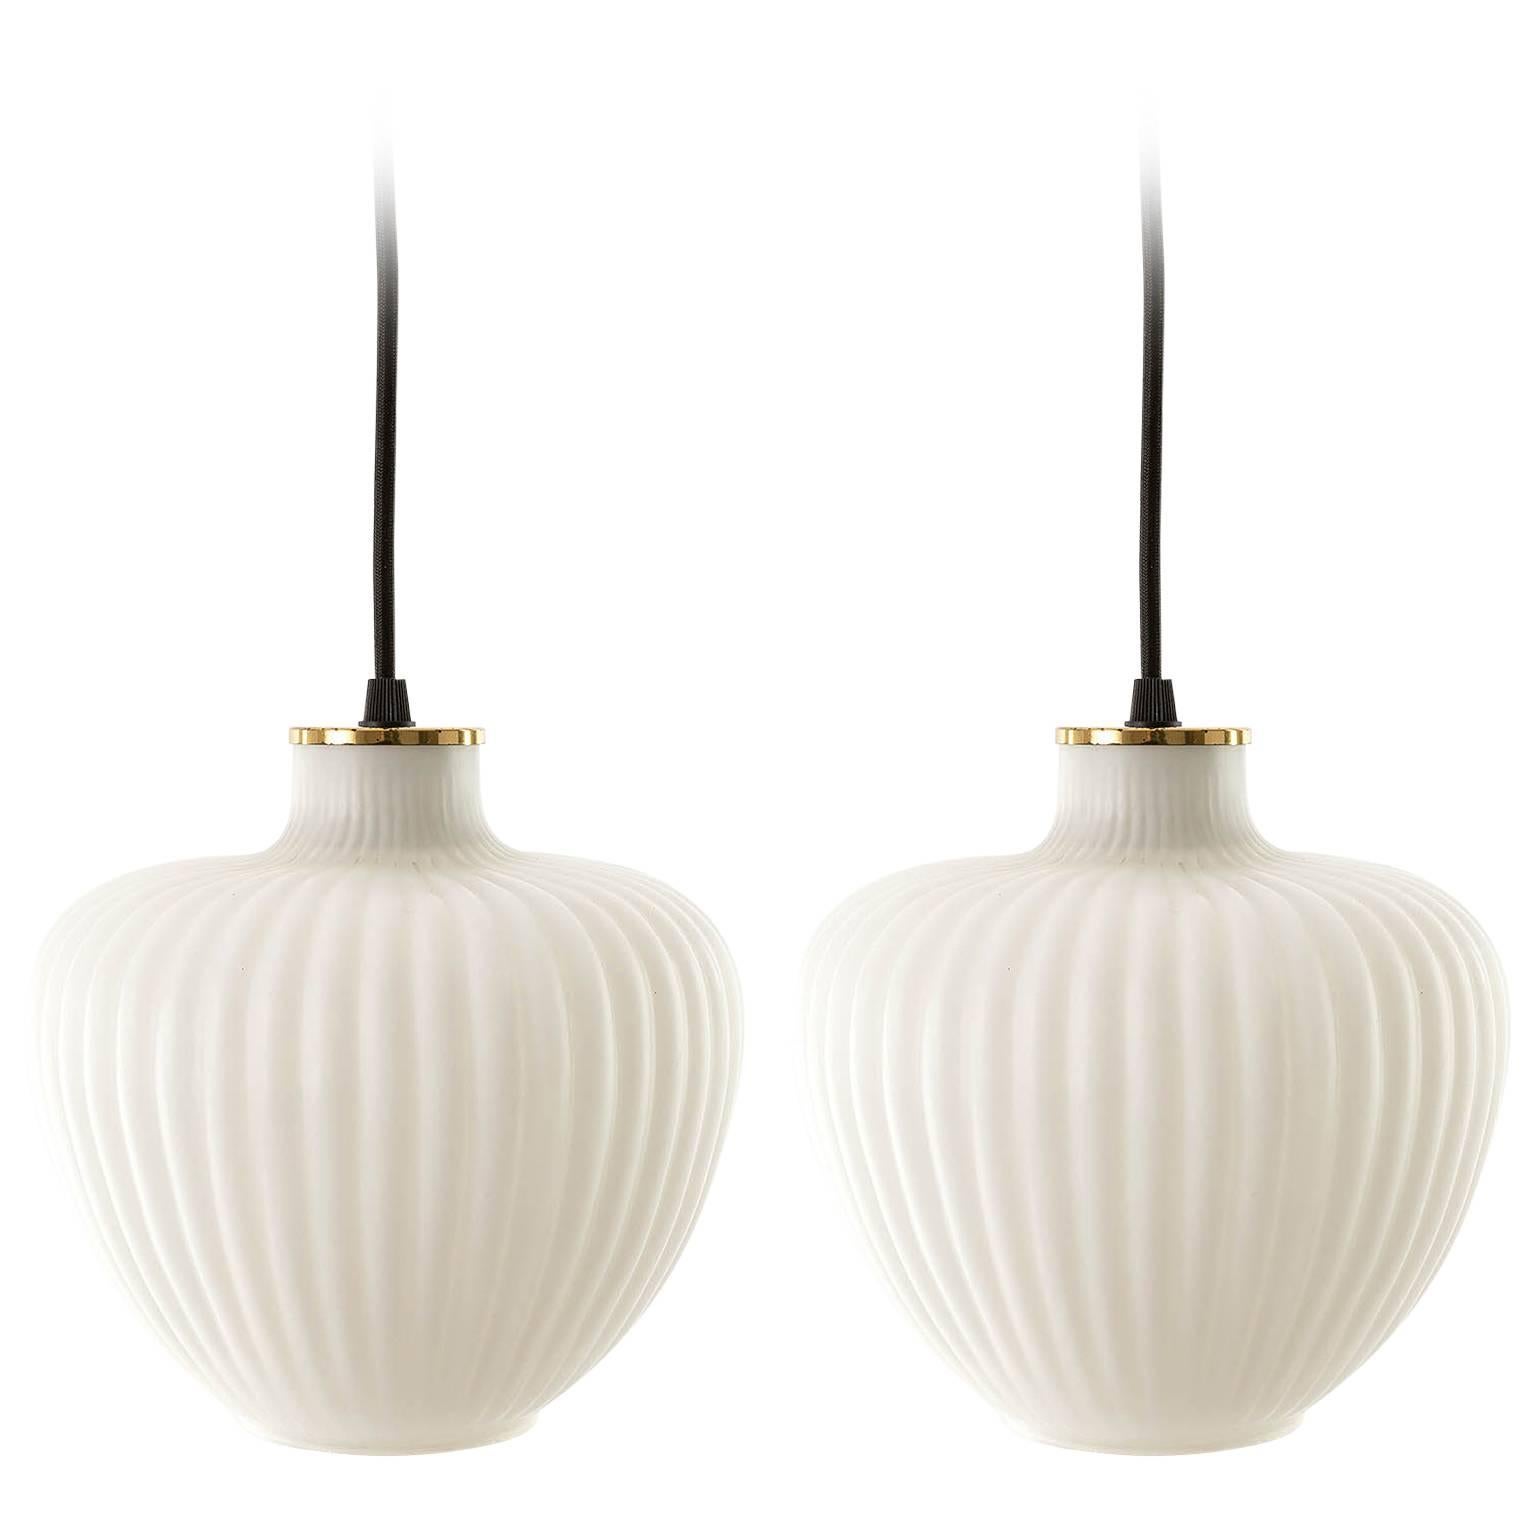 Pair of Pendant Lights, Brass and Opal Glass, 1950s